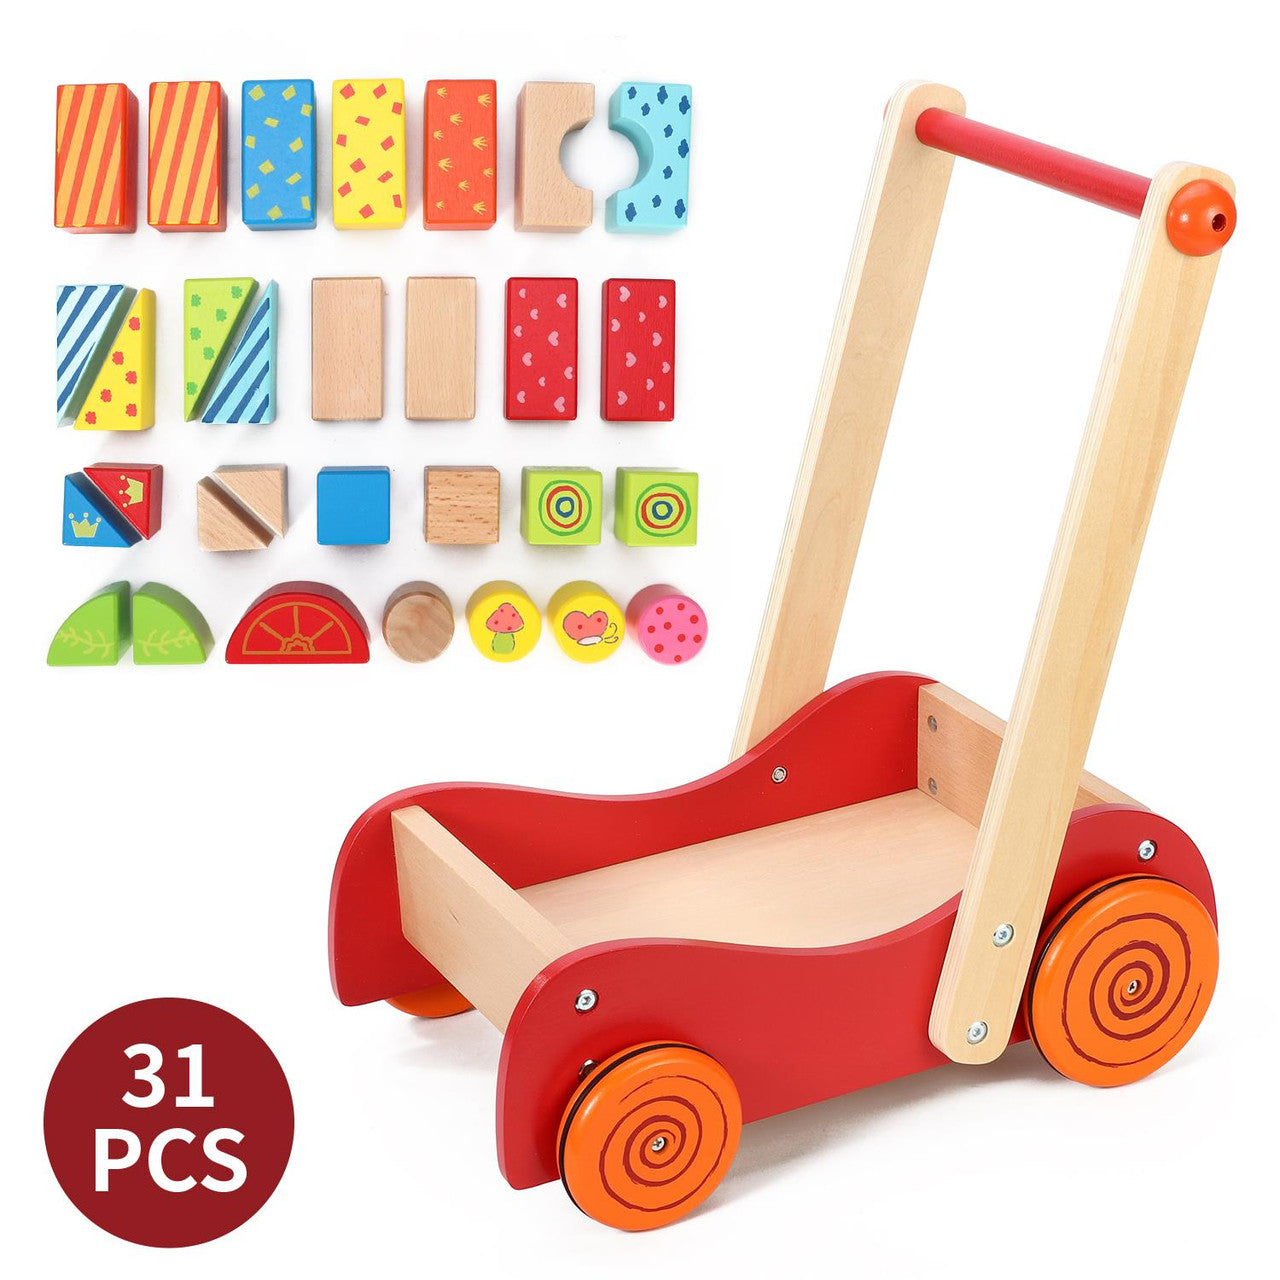 Personalised Wooden Baby Walkie Walkie Walker With Wooden Building Blocks For Toddlers - Babba box